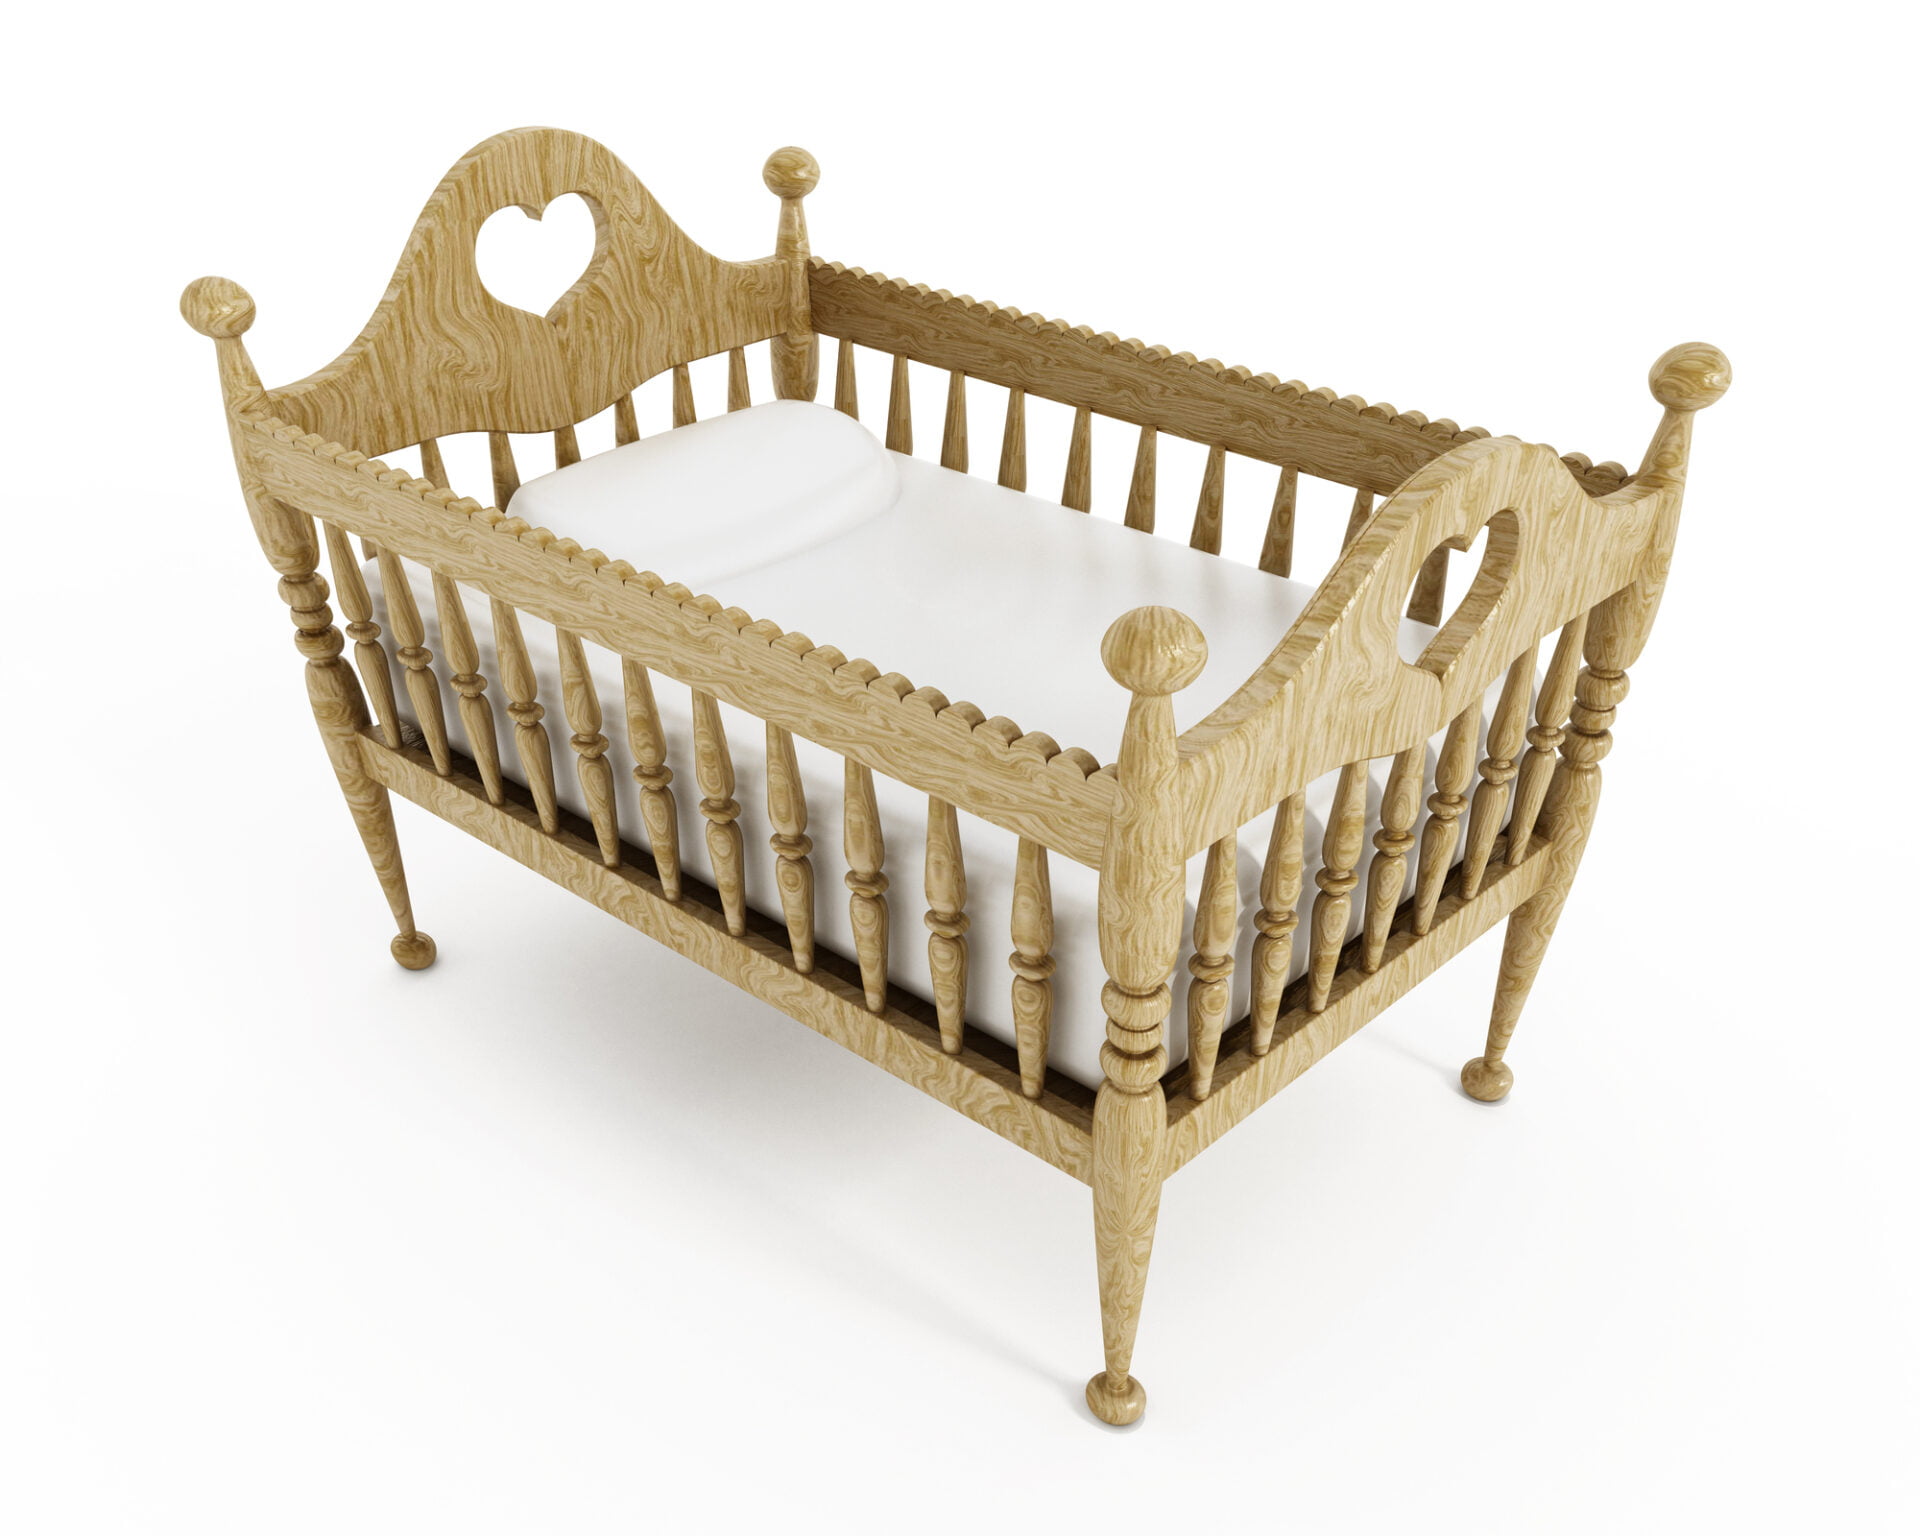 Mold Dangers Hiding Inside Newton's Crib Mattress--Looking at "Breathability" Trend